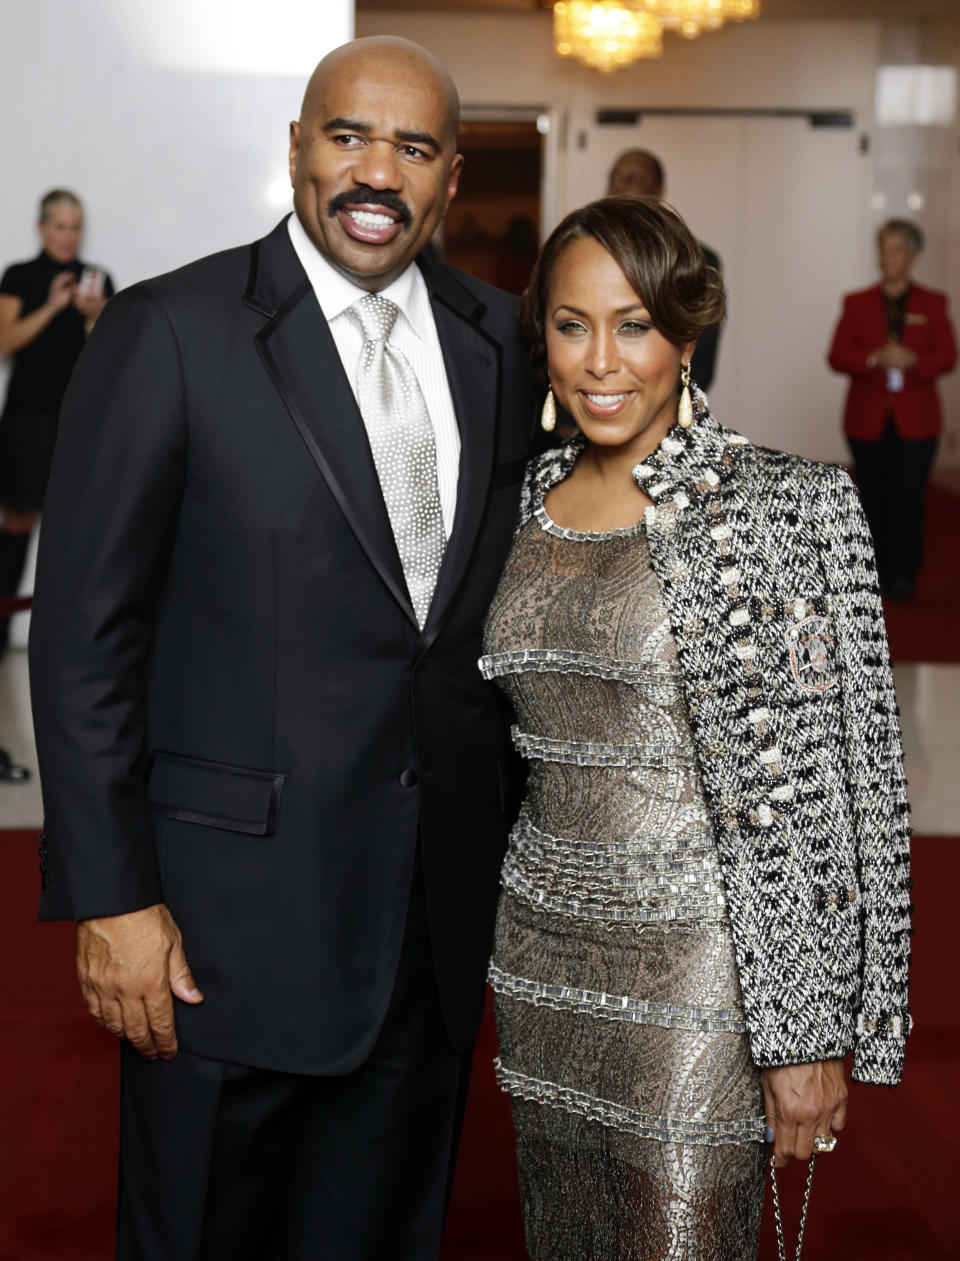 Entertainer Steve Harvey, left, with his wife Marjorie Bridges pose for photographers on the red carpet before entertainer Ellen DeGeneres receives the 15th annual Mark Twain Prize for American Humor at the Kennedy Center, Monday, Oct. 22, 2012, in Washington. (AP Photo/Alex Brandon)